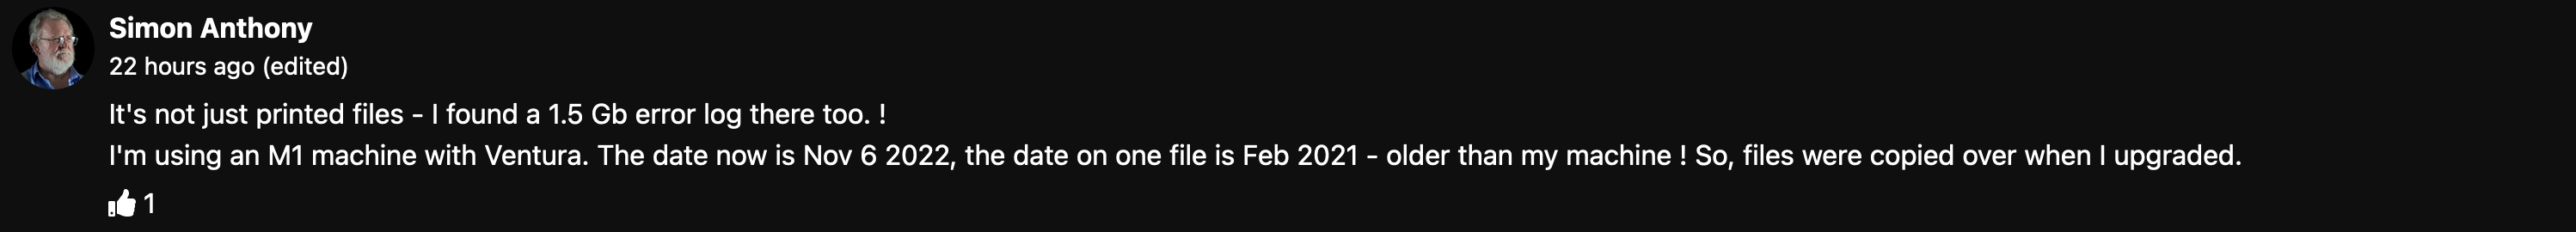 Youtube comment stating files were even copied from a previous Mac and error logs taking a lot of space